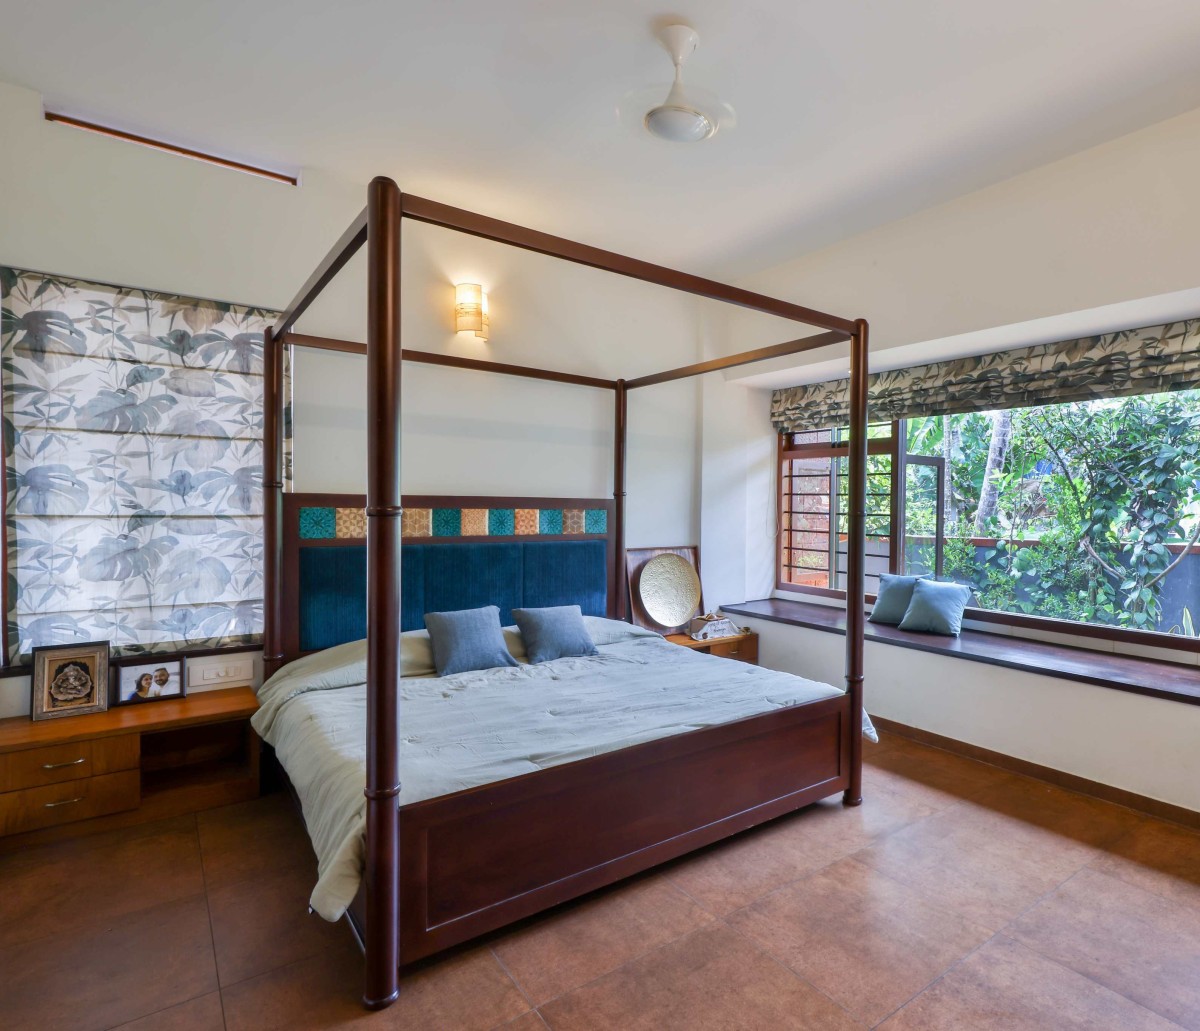 Bedroom of Our Space by Satkriya Architecture